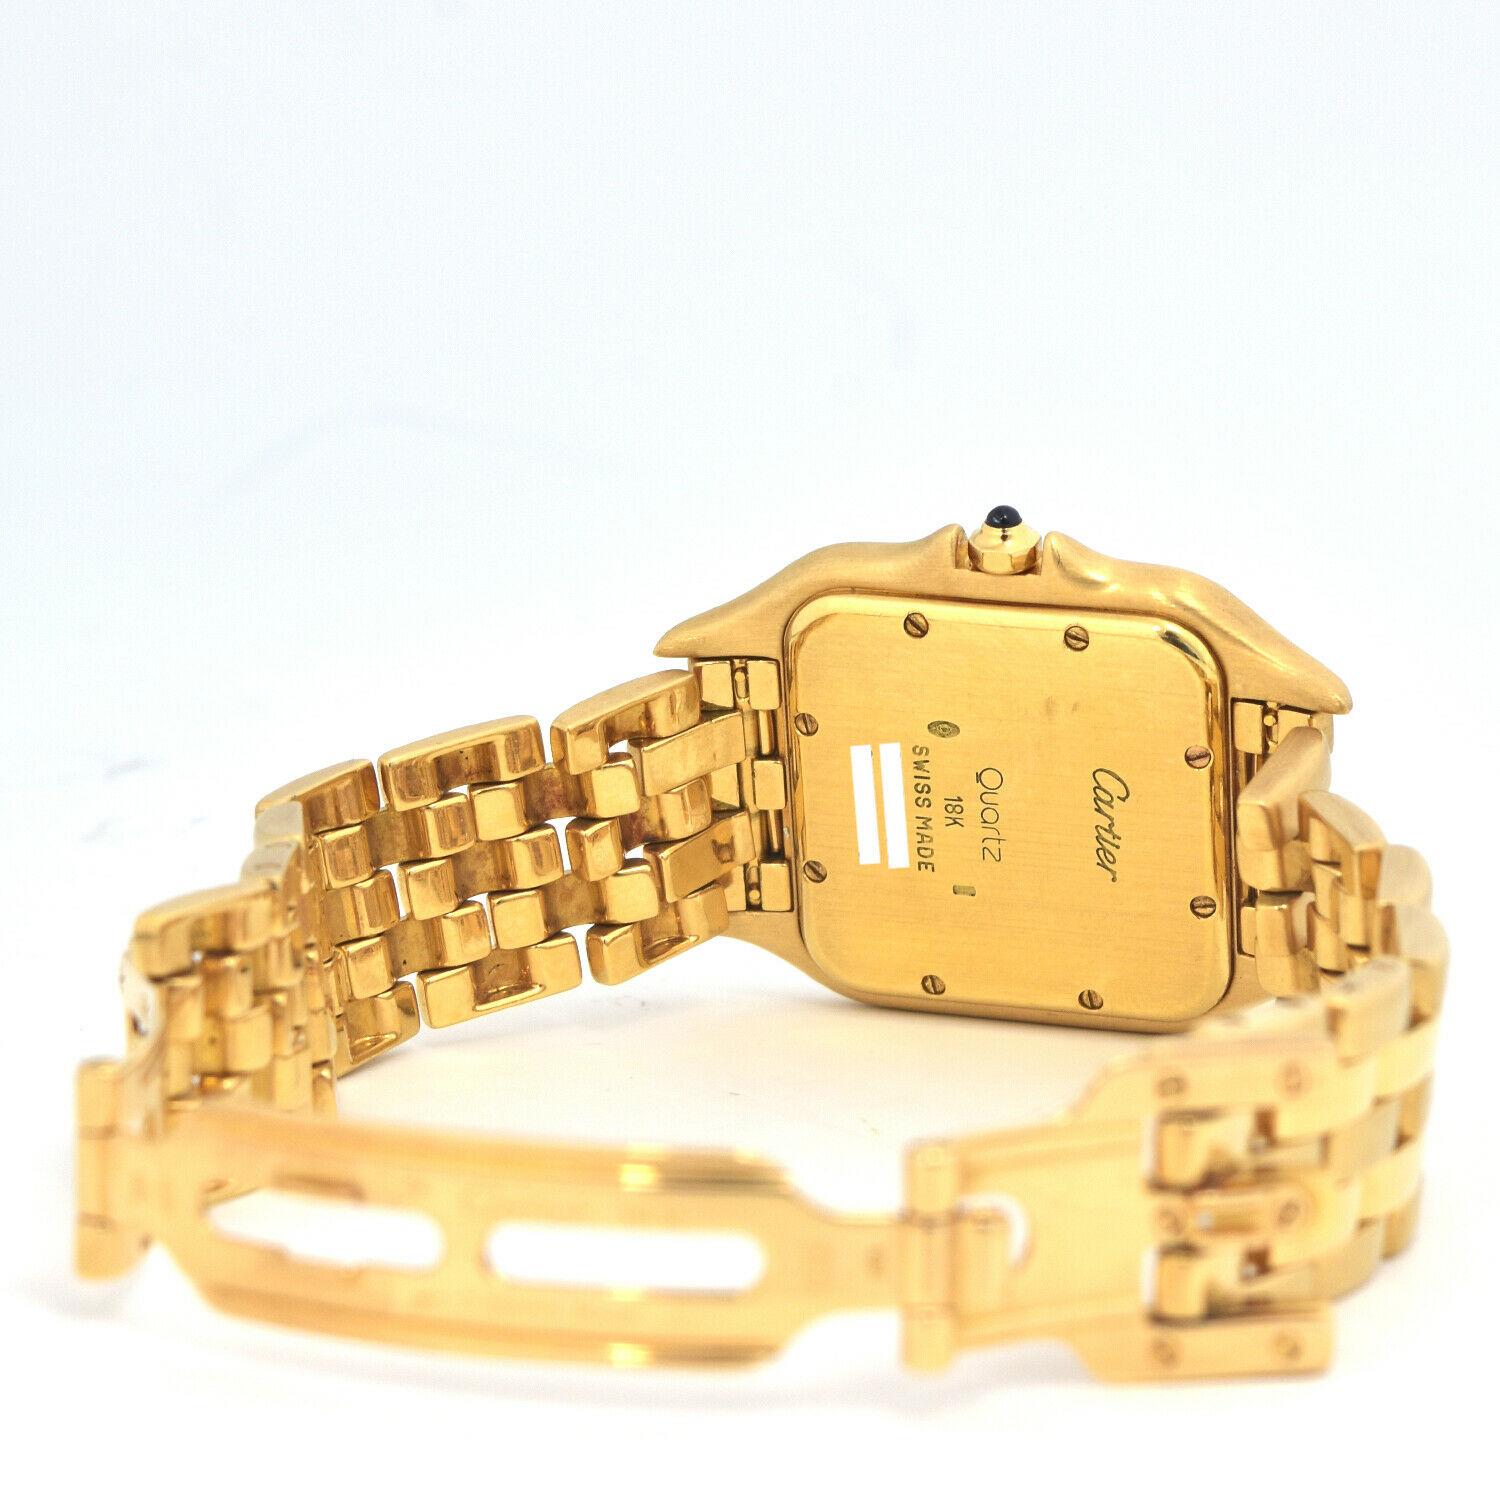 Cartier Panthere 887968 Medium in 18k Yellow Gold and Bracelet with Box & Papers 1